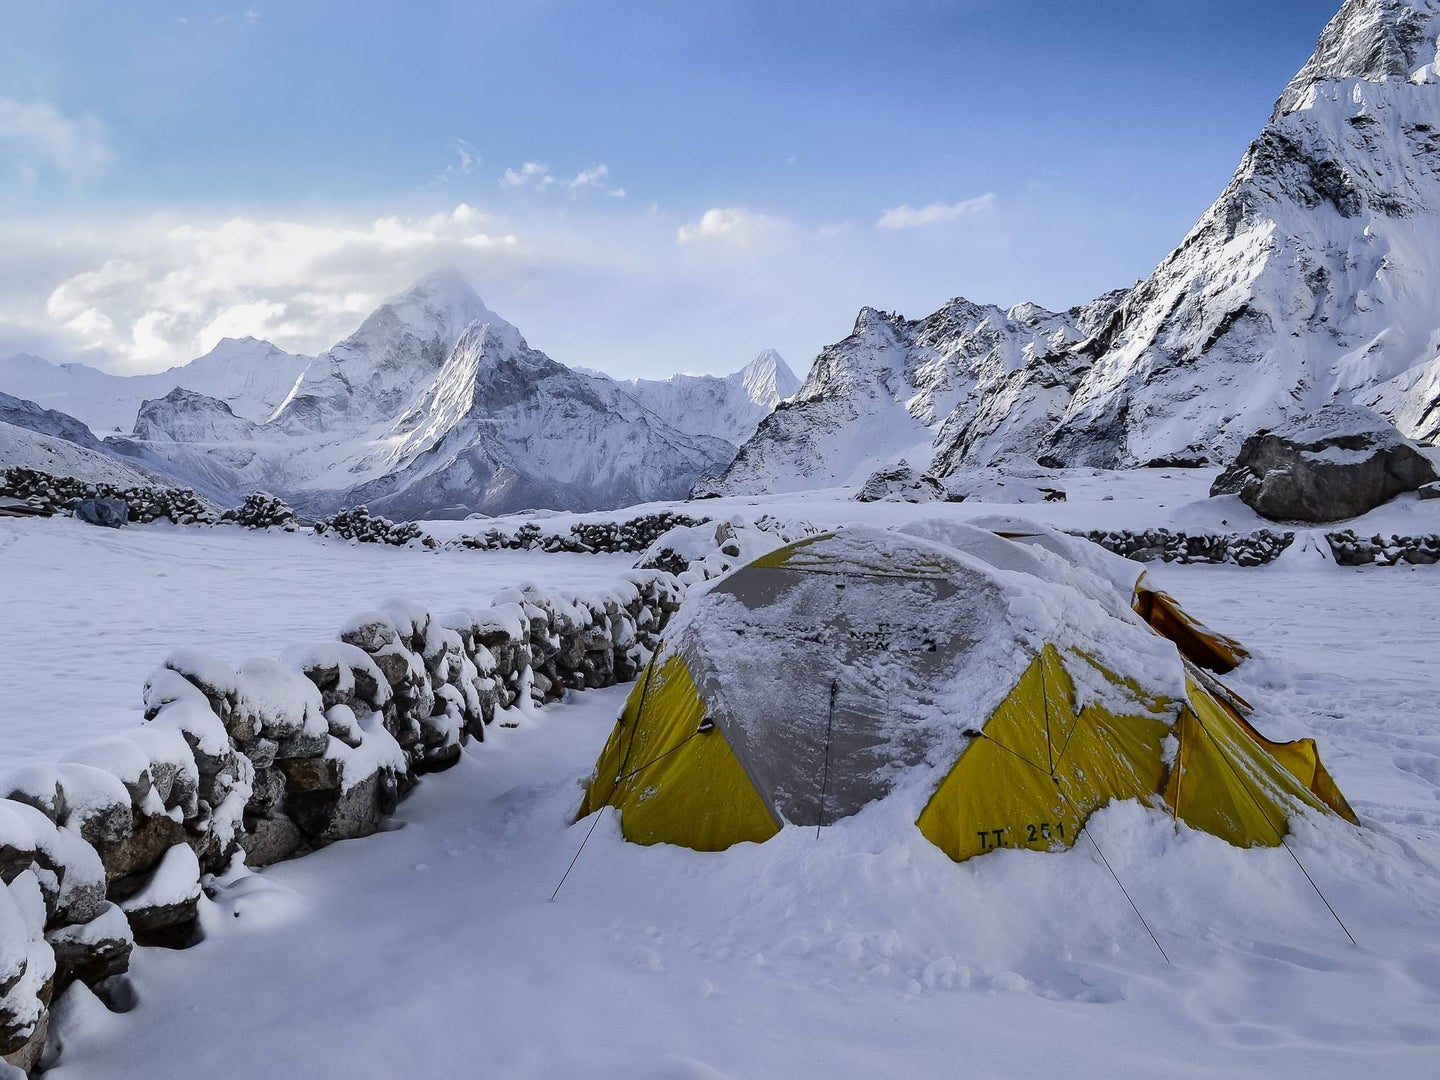 Green camping tent in the middle of a snowy mountain